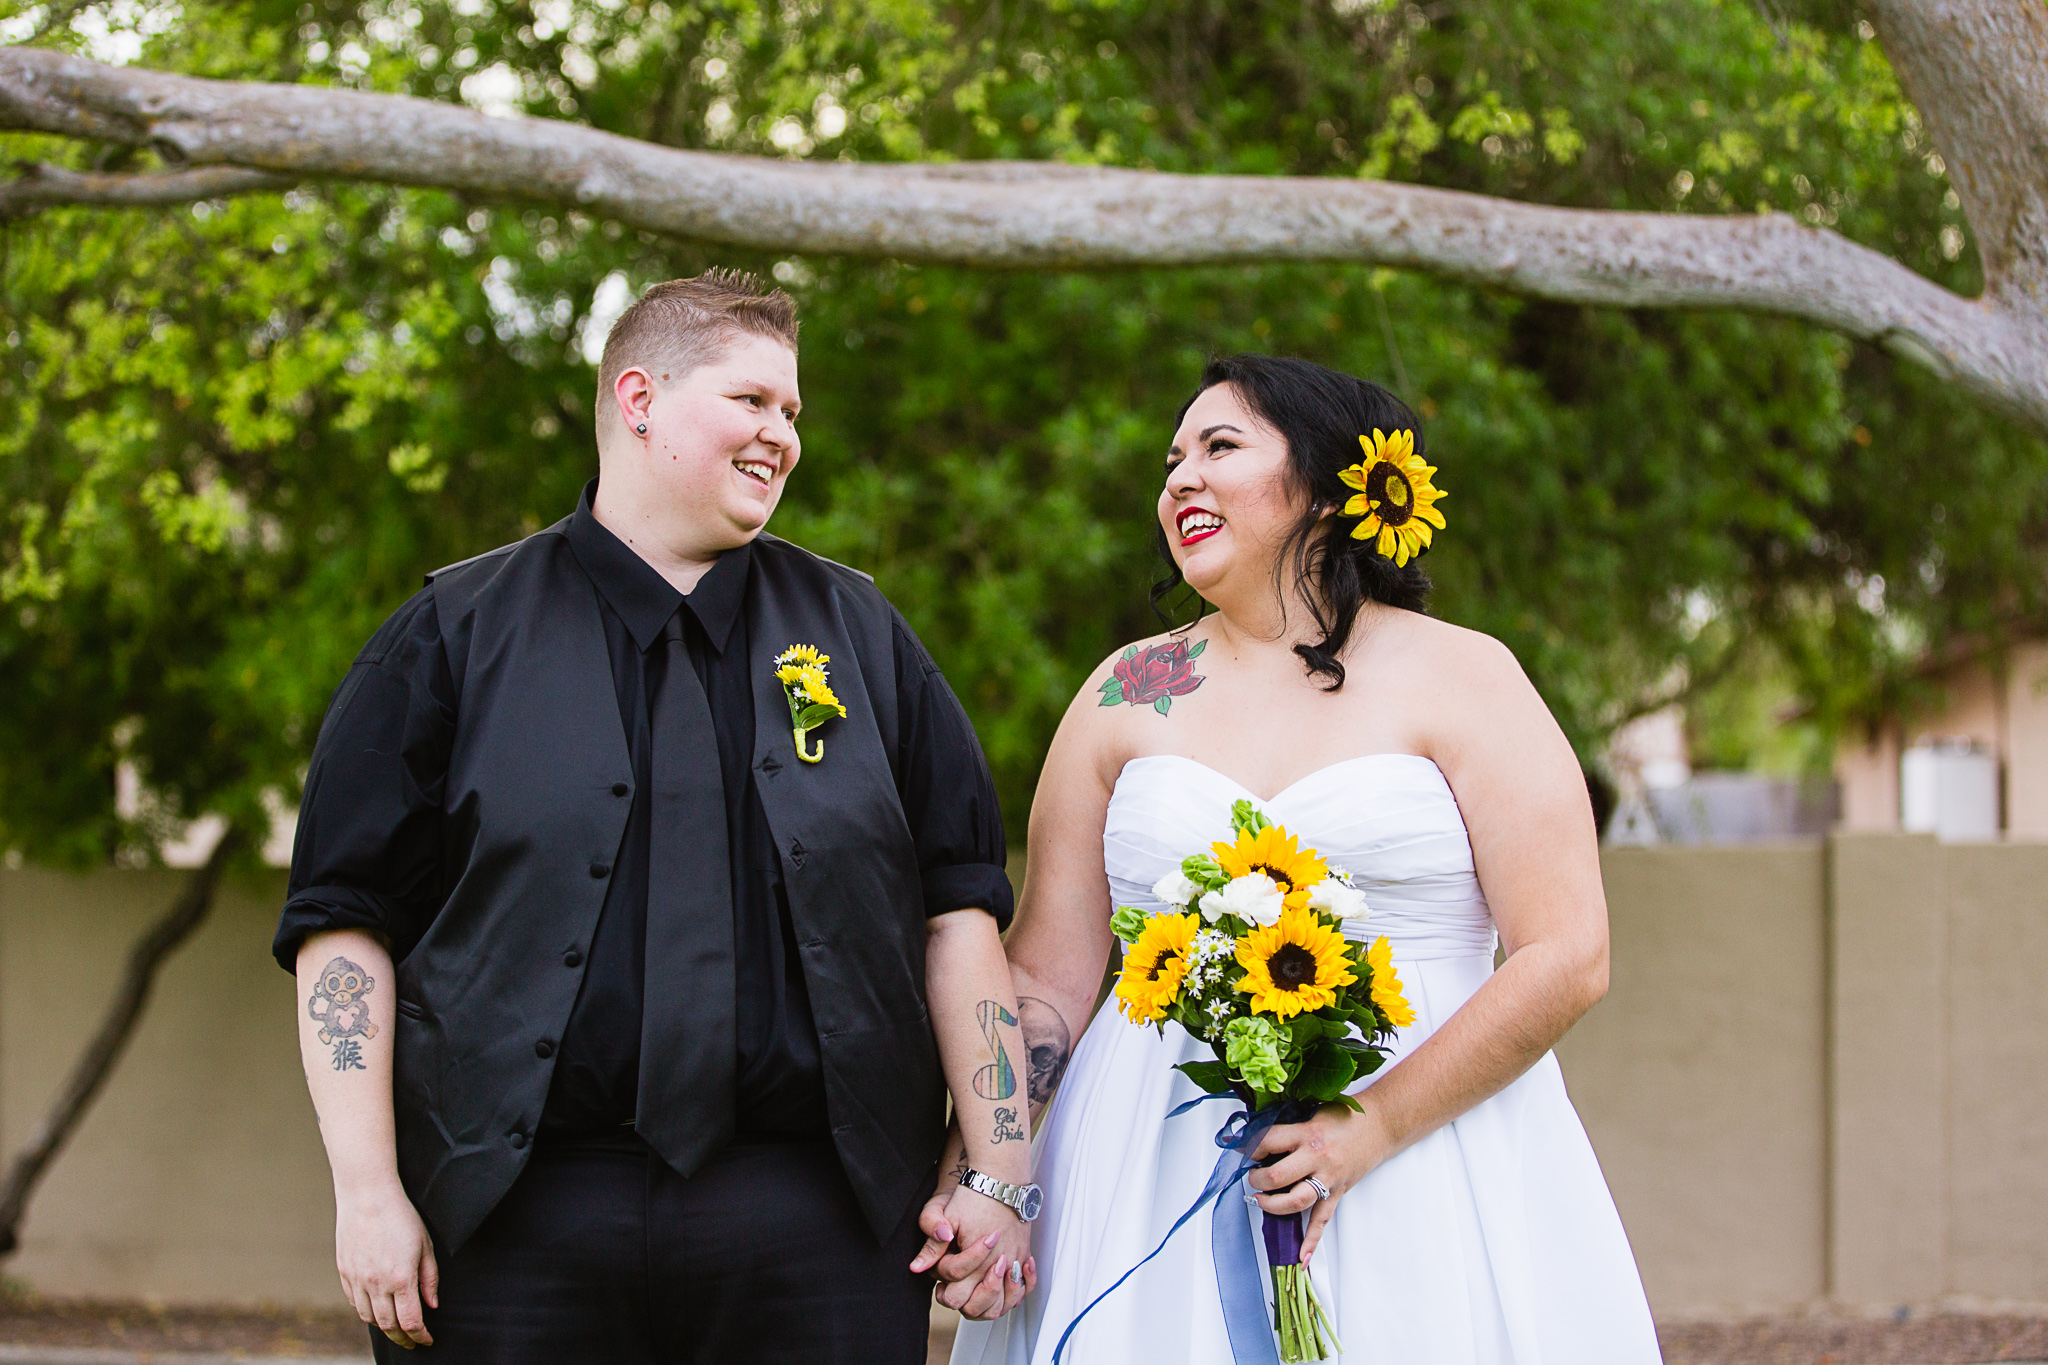 Brides a laugh on their wedding day by LGBT friendly wedding photographer PMA Photography.